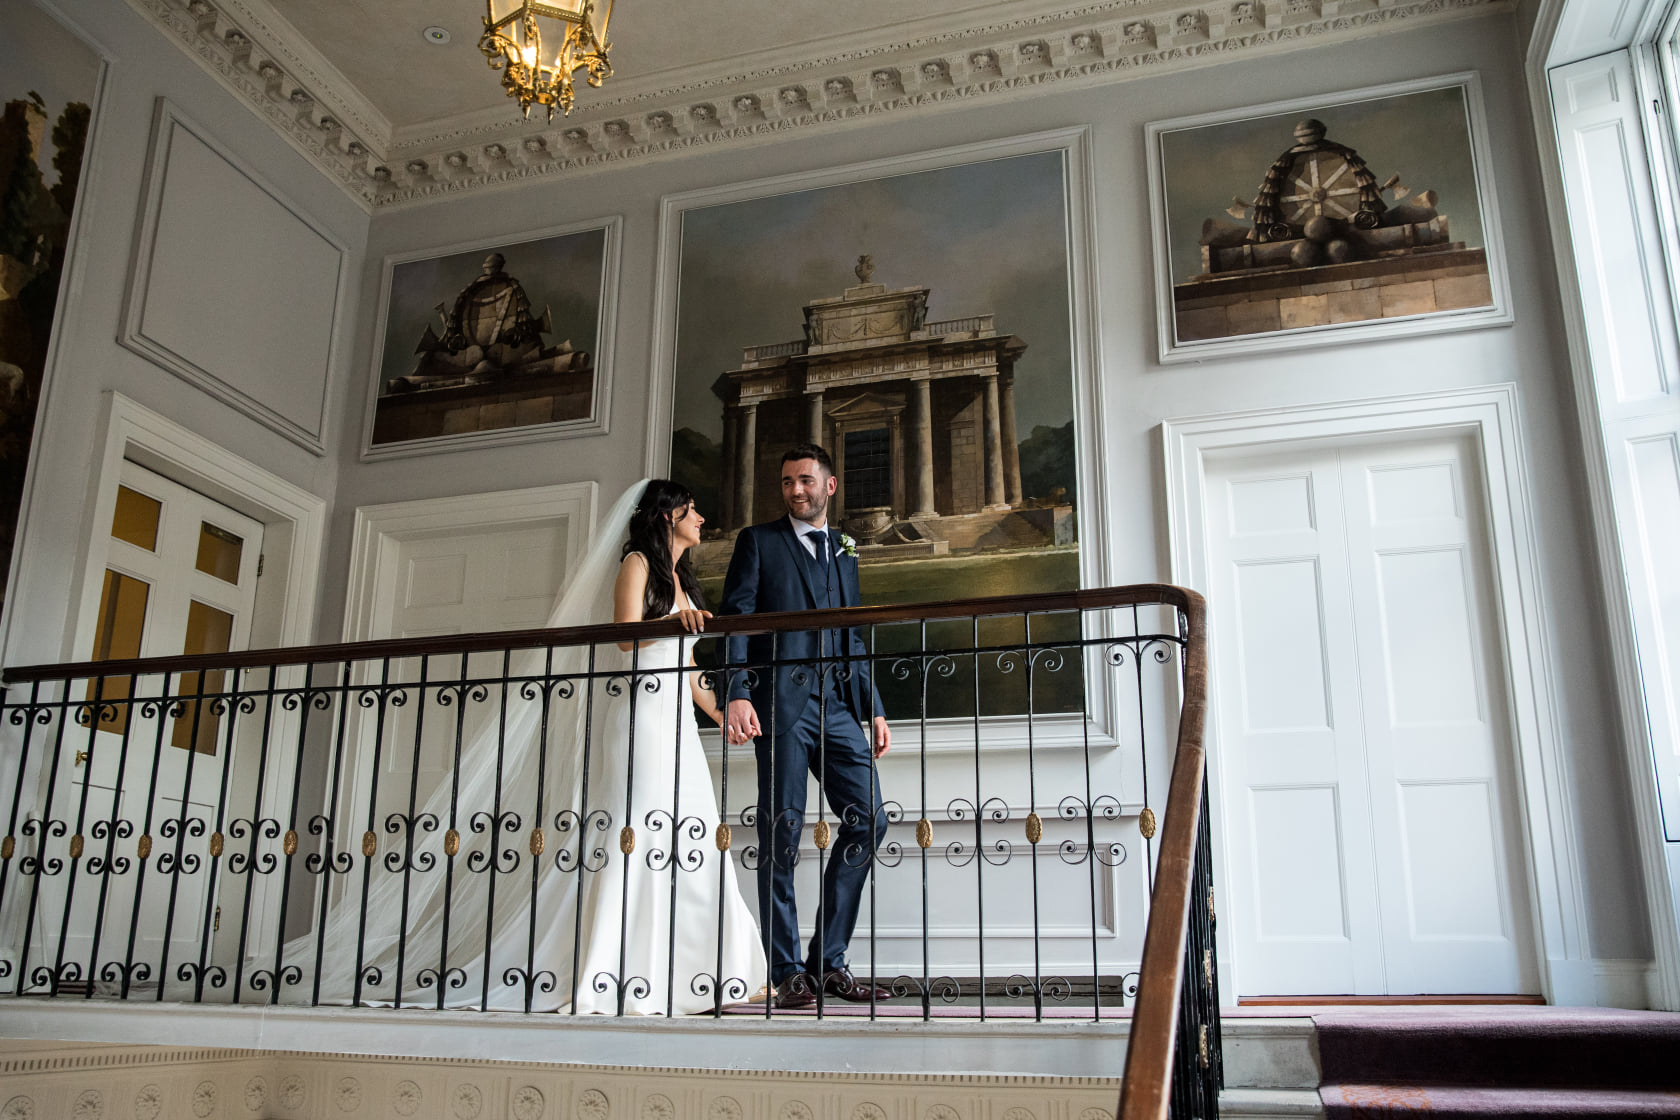 A bride and groom walking in a hallway towards the stairs. The bride is holding onto the railing. Image used in the 37 Questions To Ask Your Wedding Photographer article.